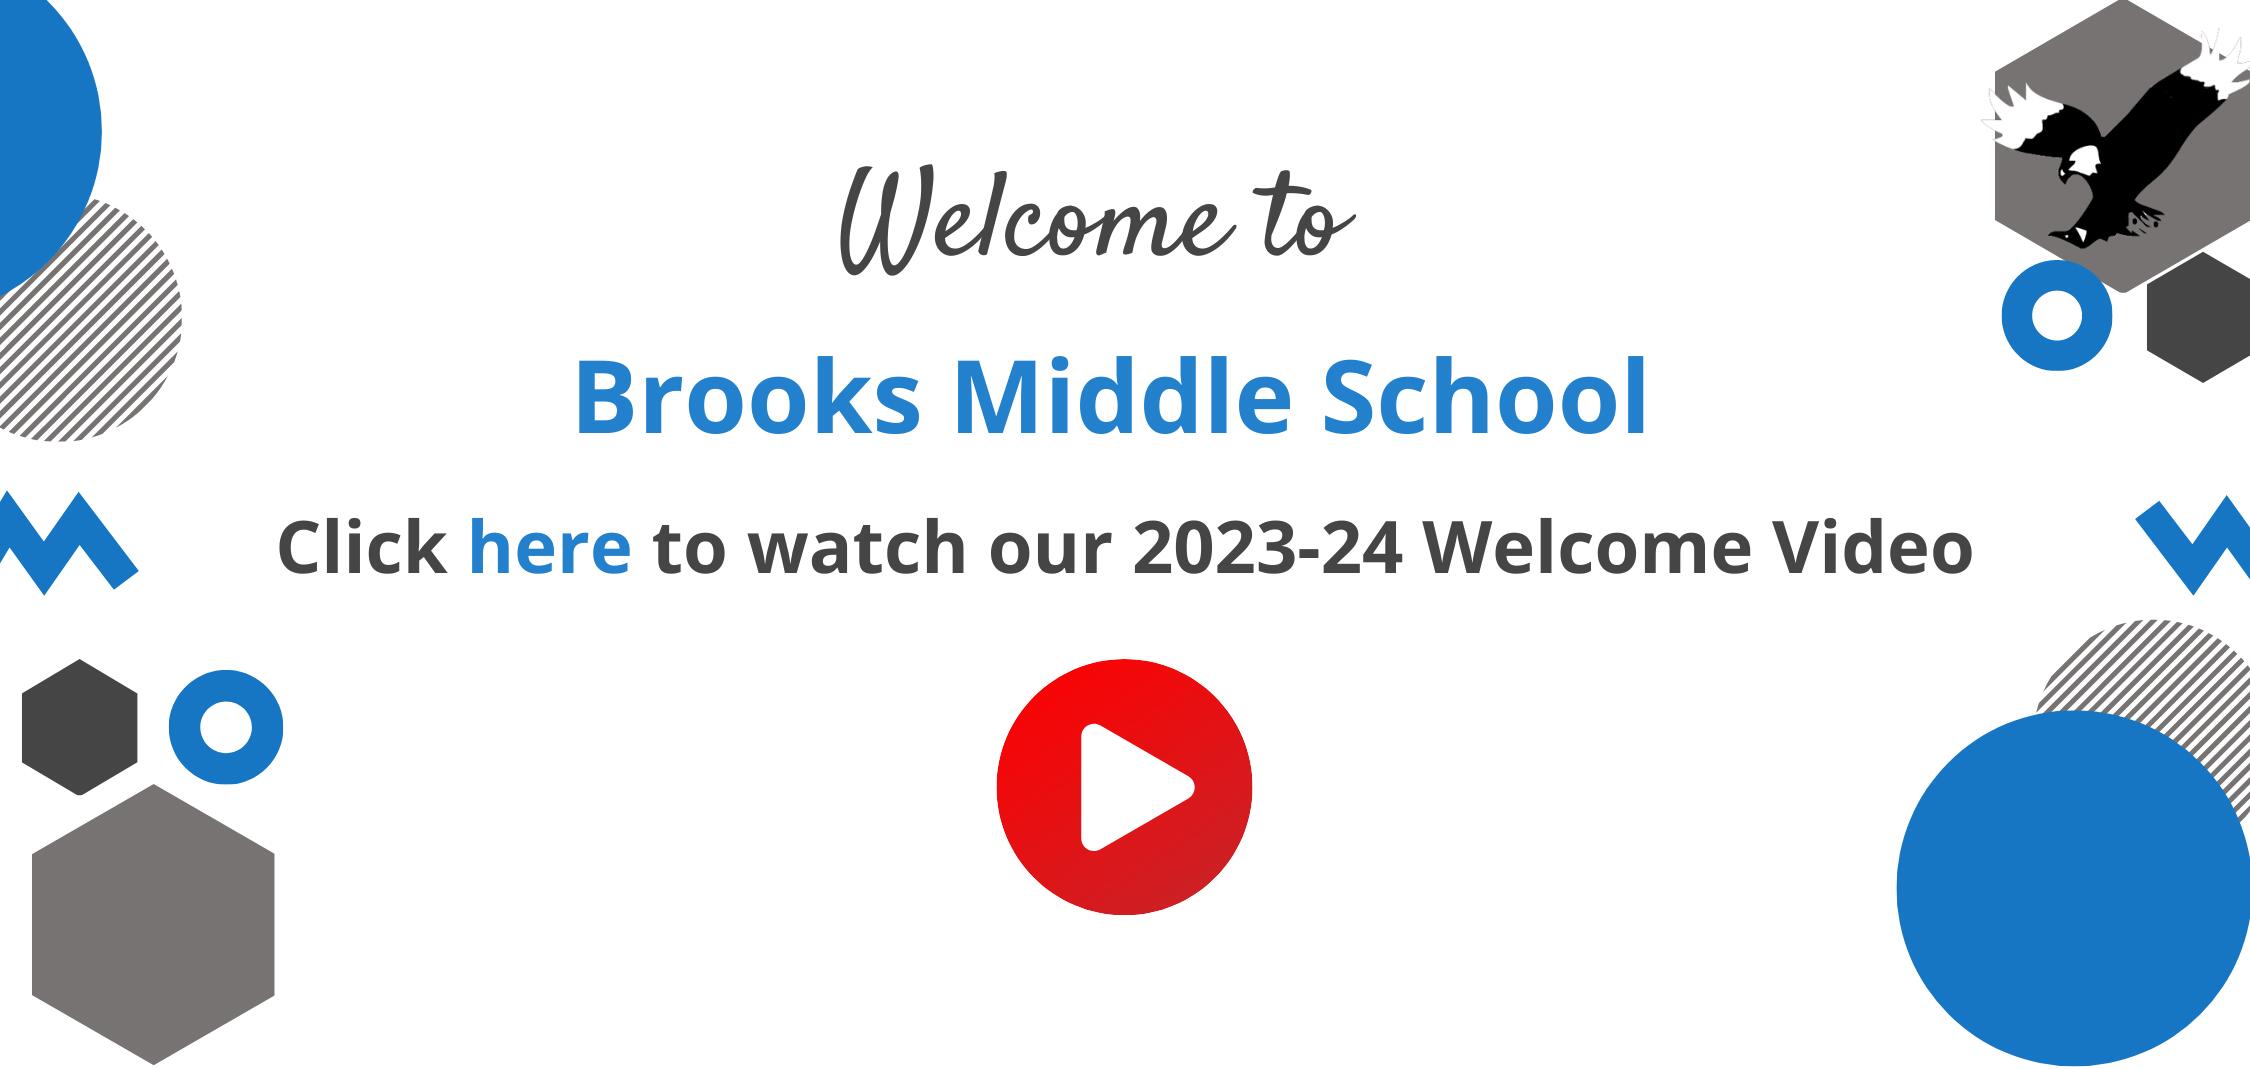 Click here to watch the 2023-24 Brooks Middle School Welcome Video